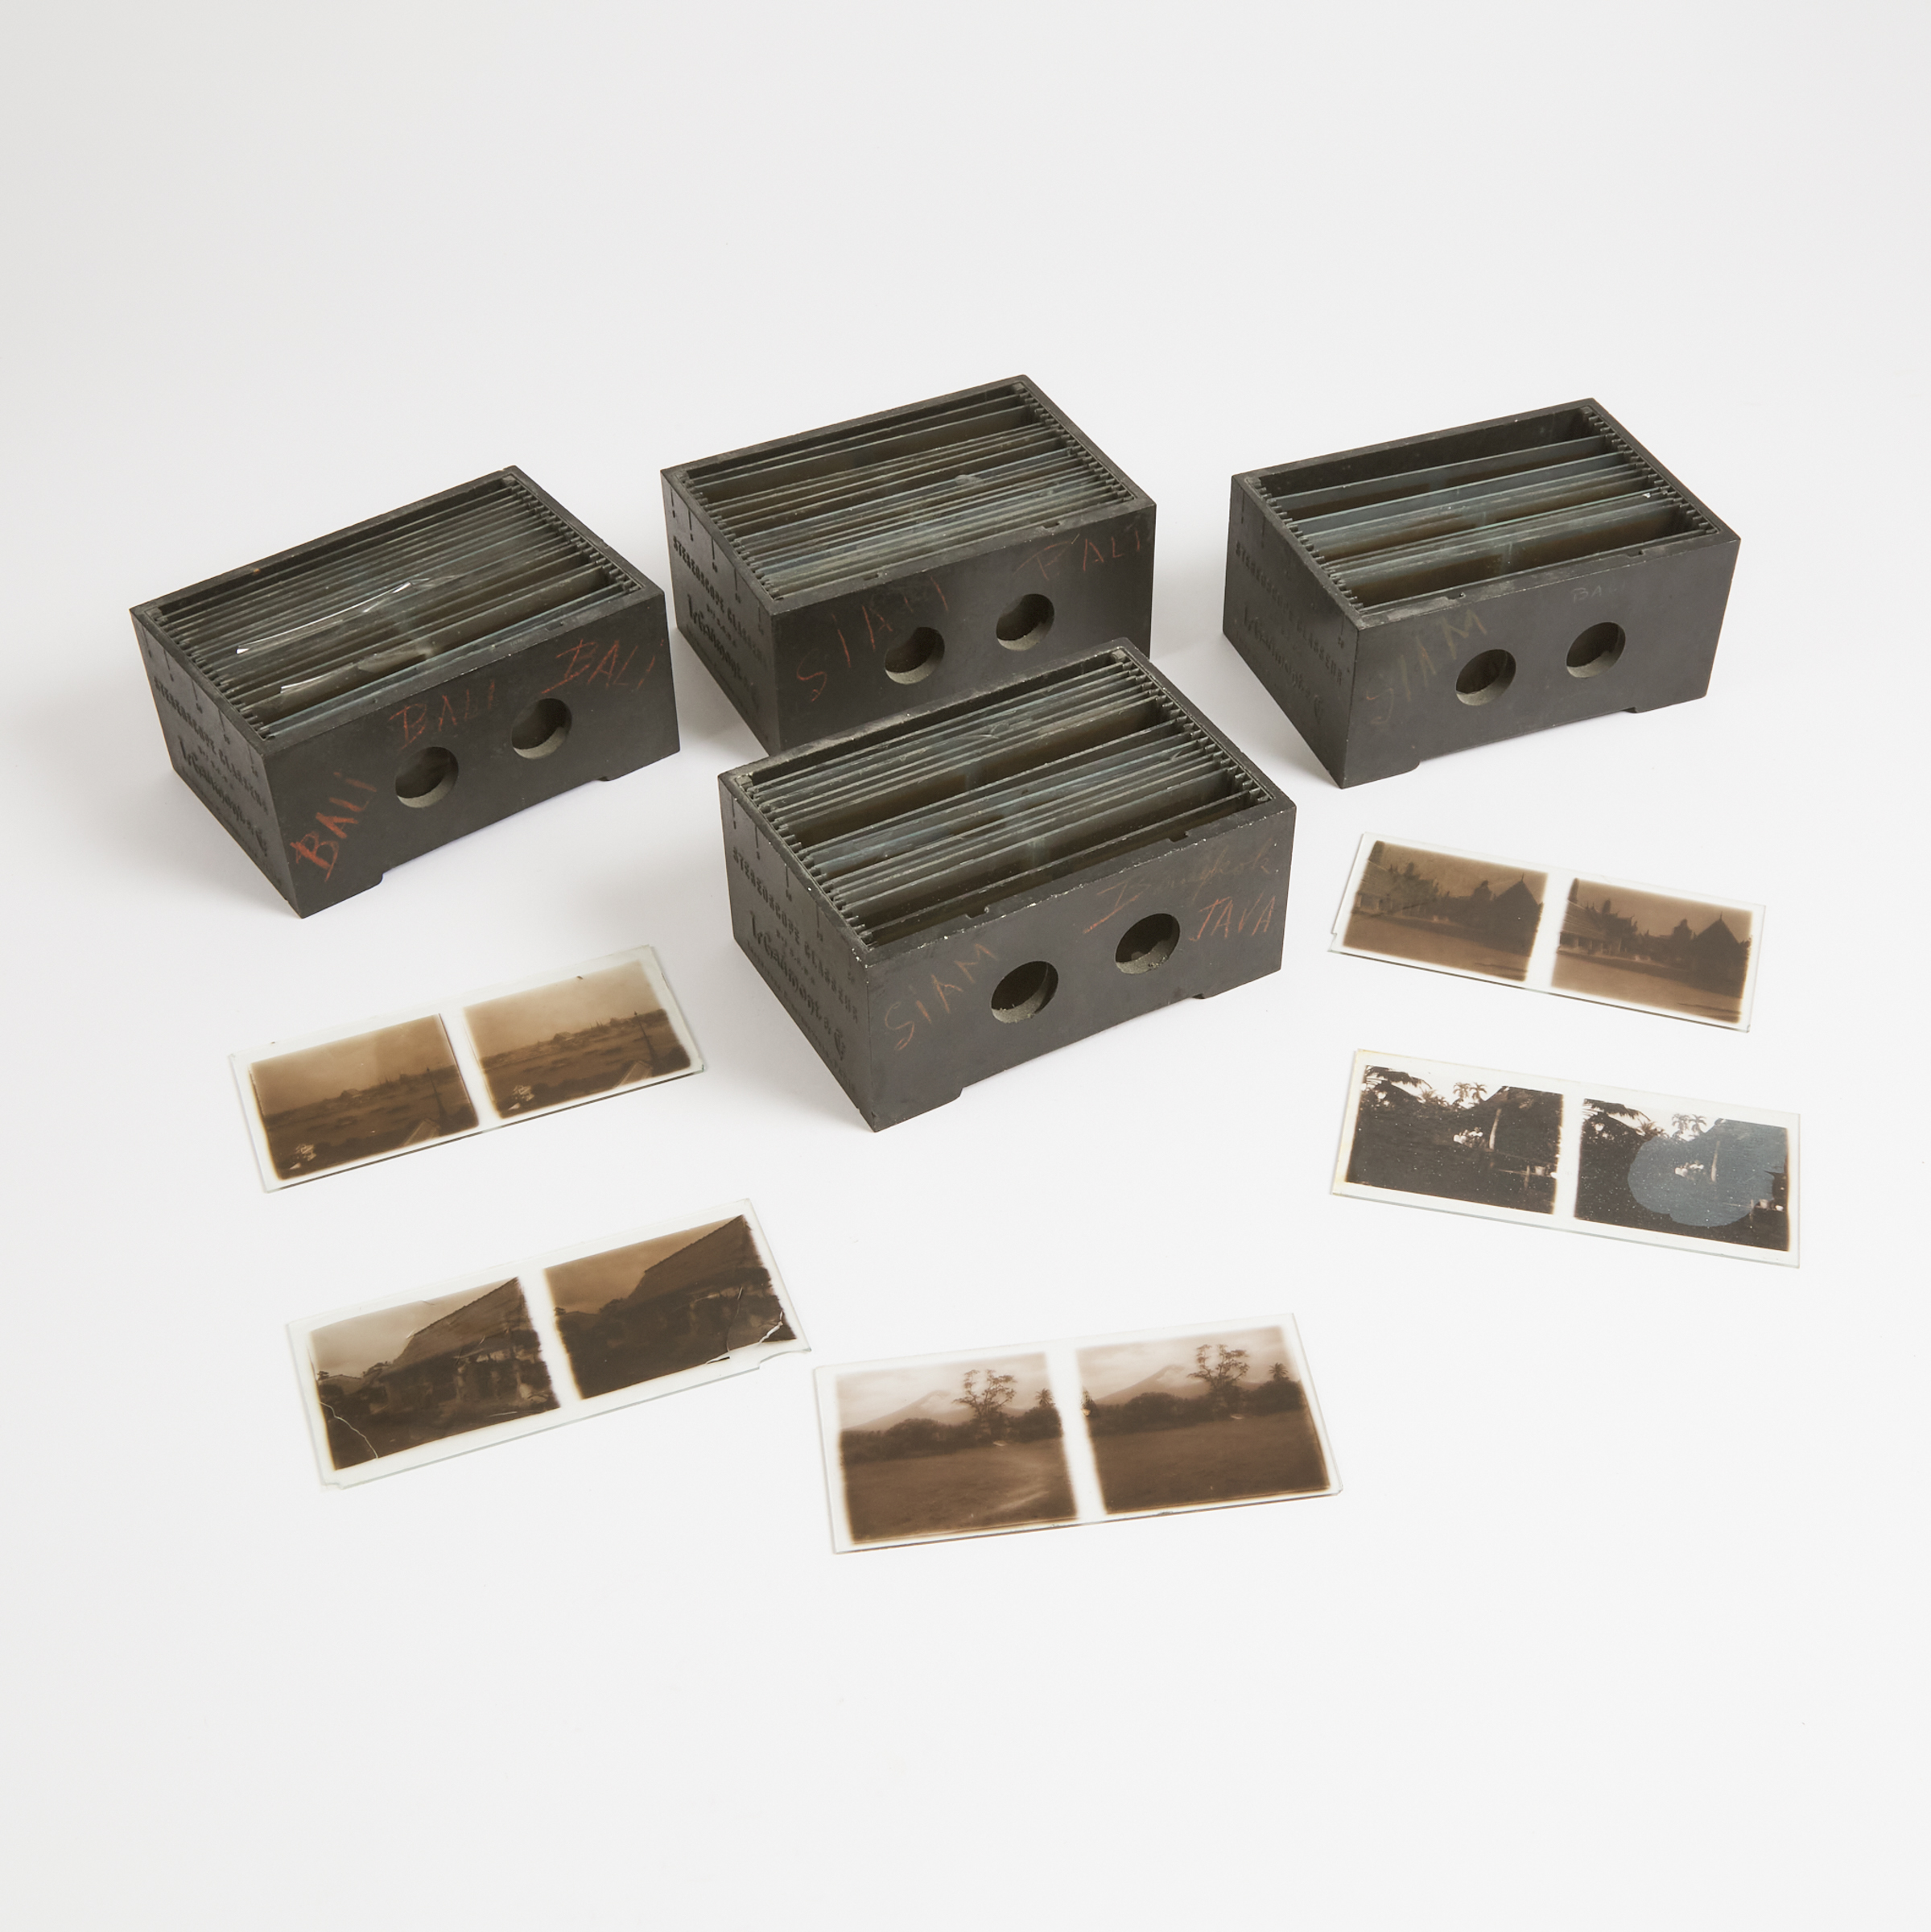 Approximately 62 Didactic Glass Plate 'Stereo Spido' (Stereoscope) Slides, c.1900